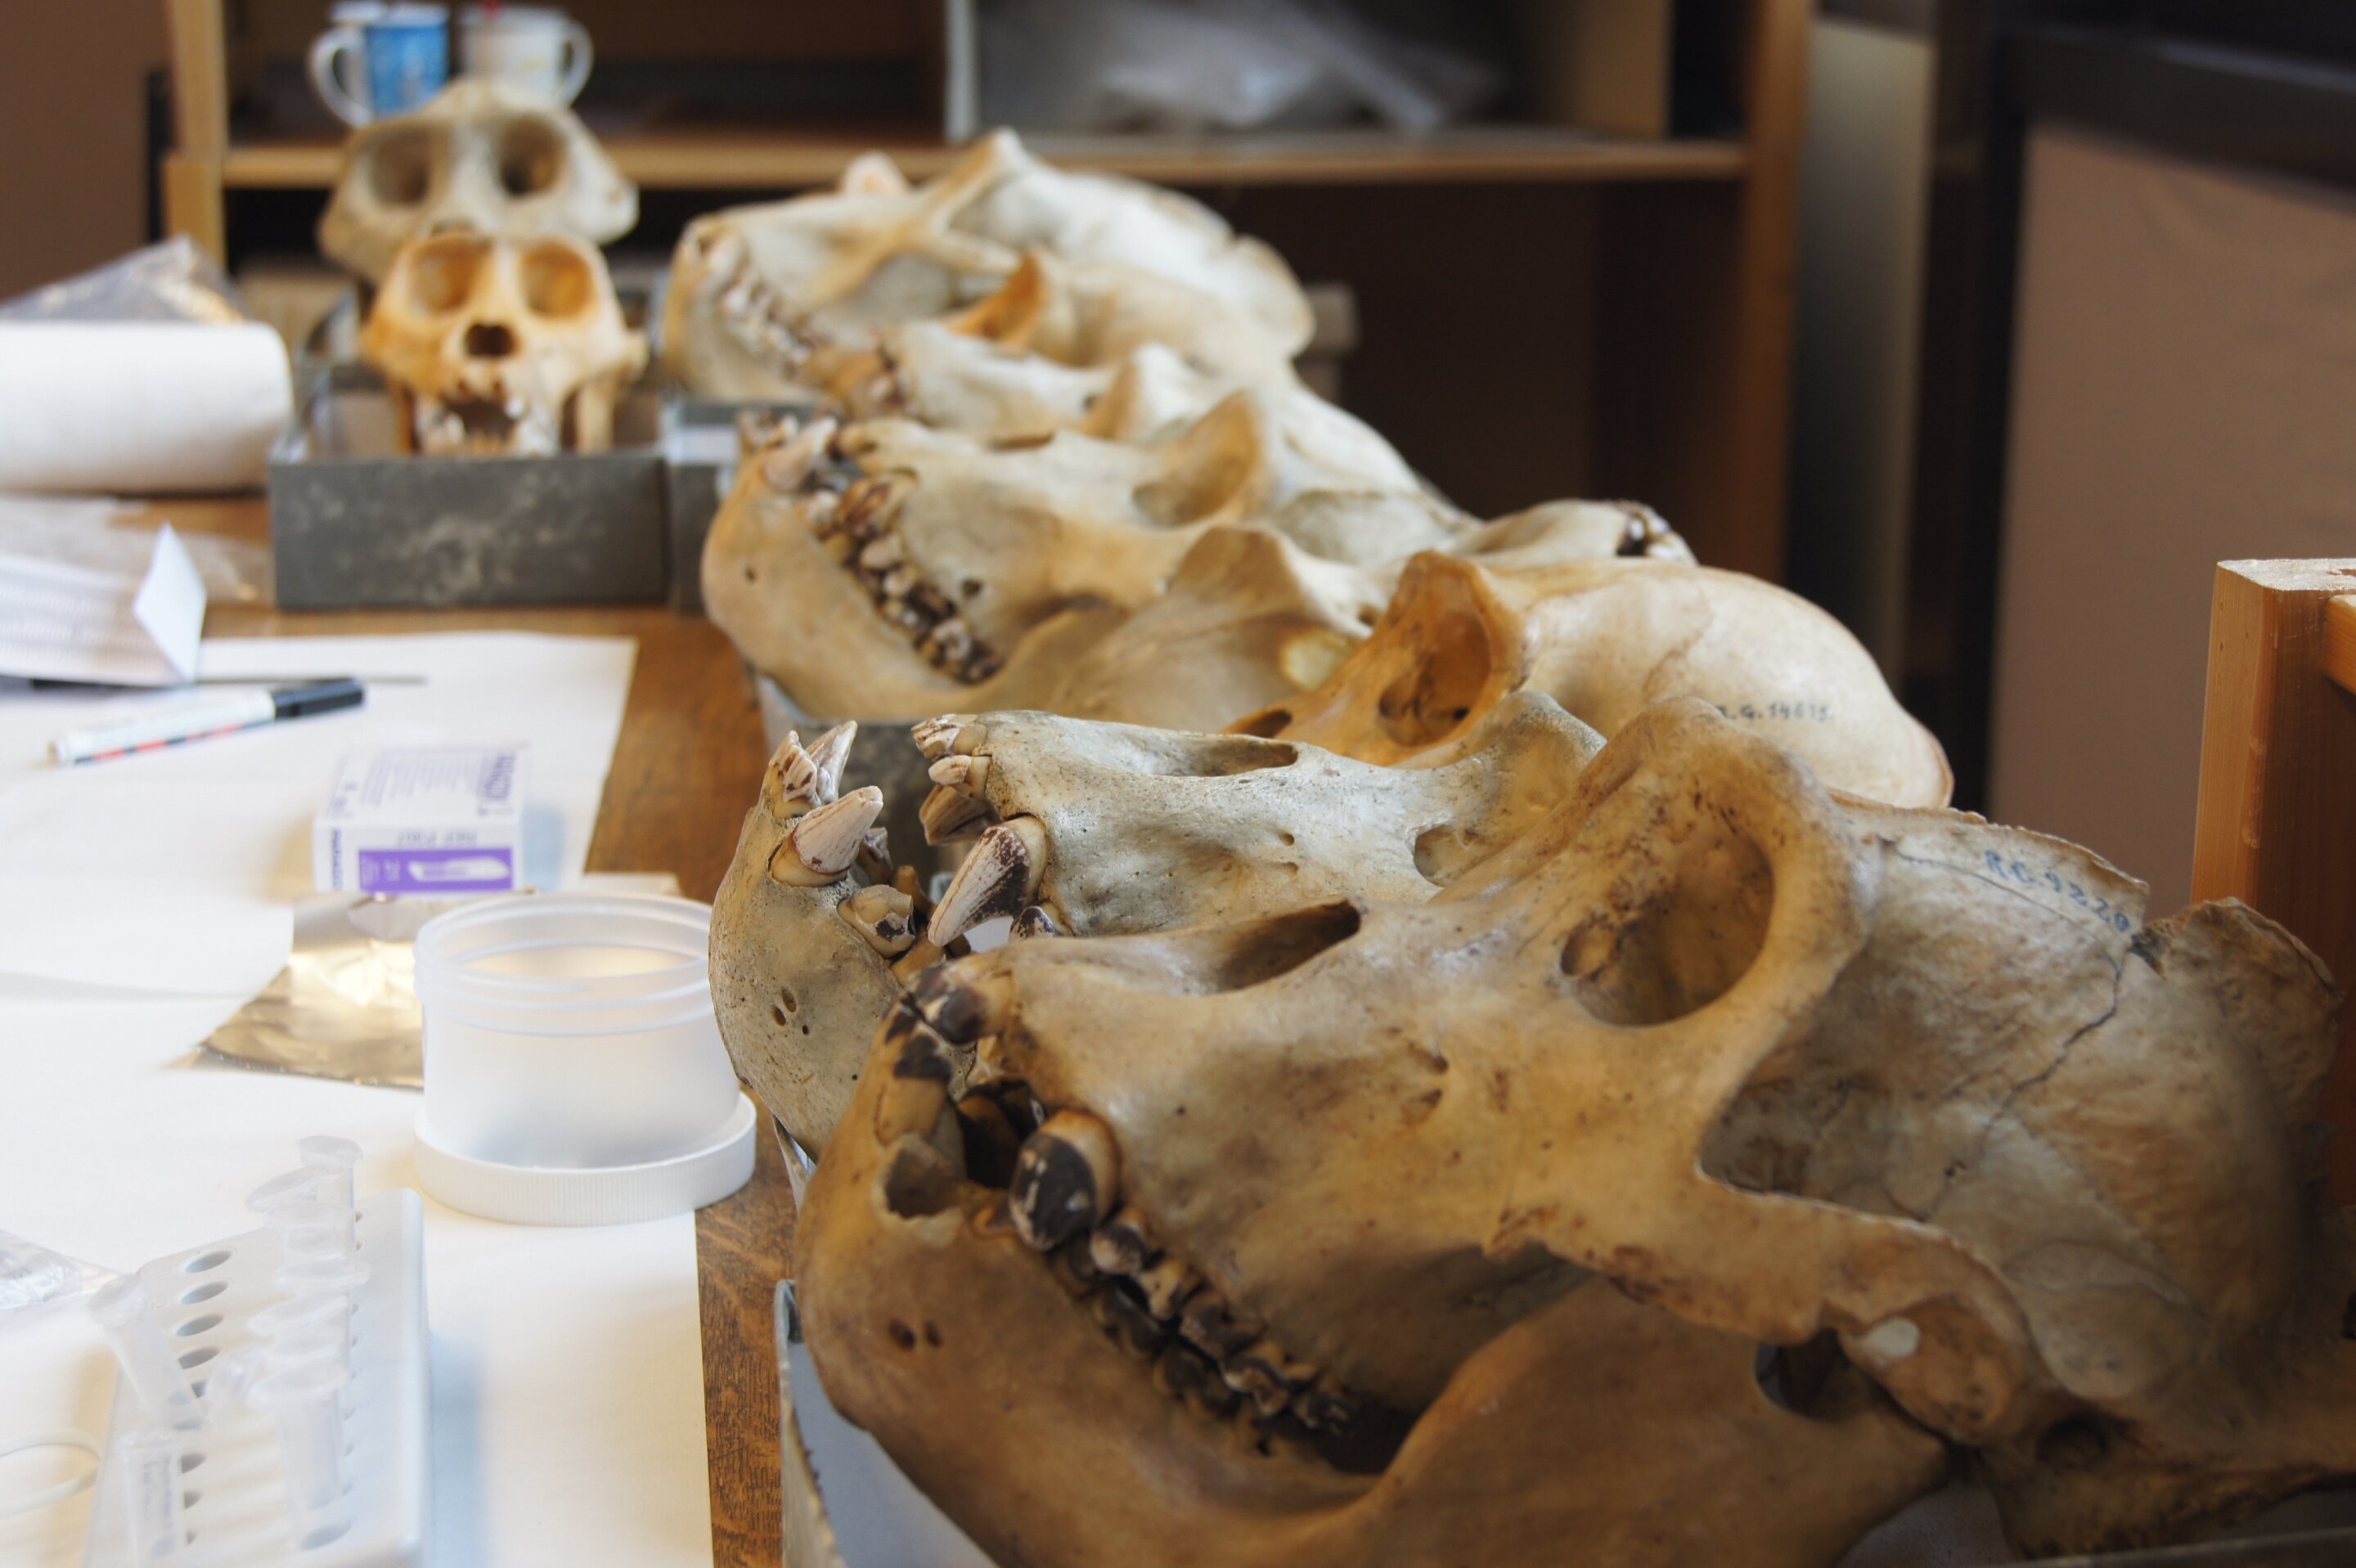 Researchers reconstruct the oral microbiomes of Neanderthals, primates, and humans